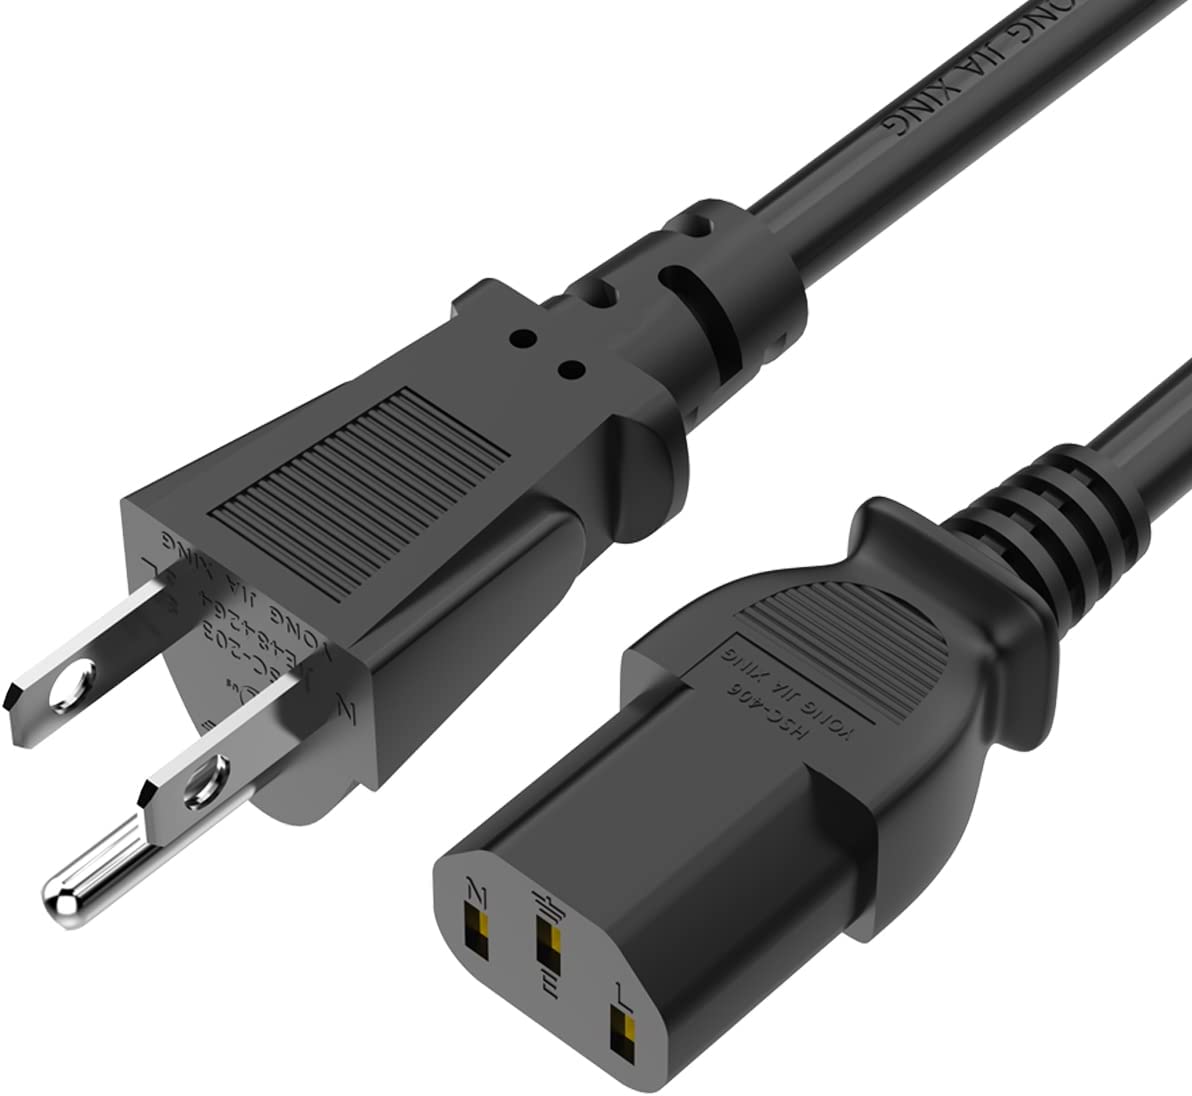 Dell Monitor Power Cable - Bargainwizz